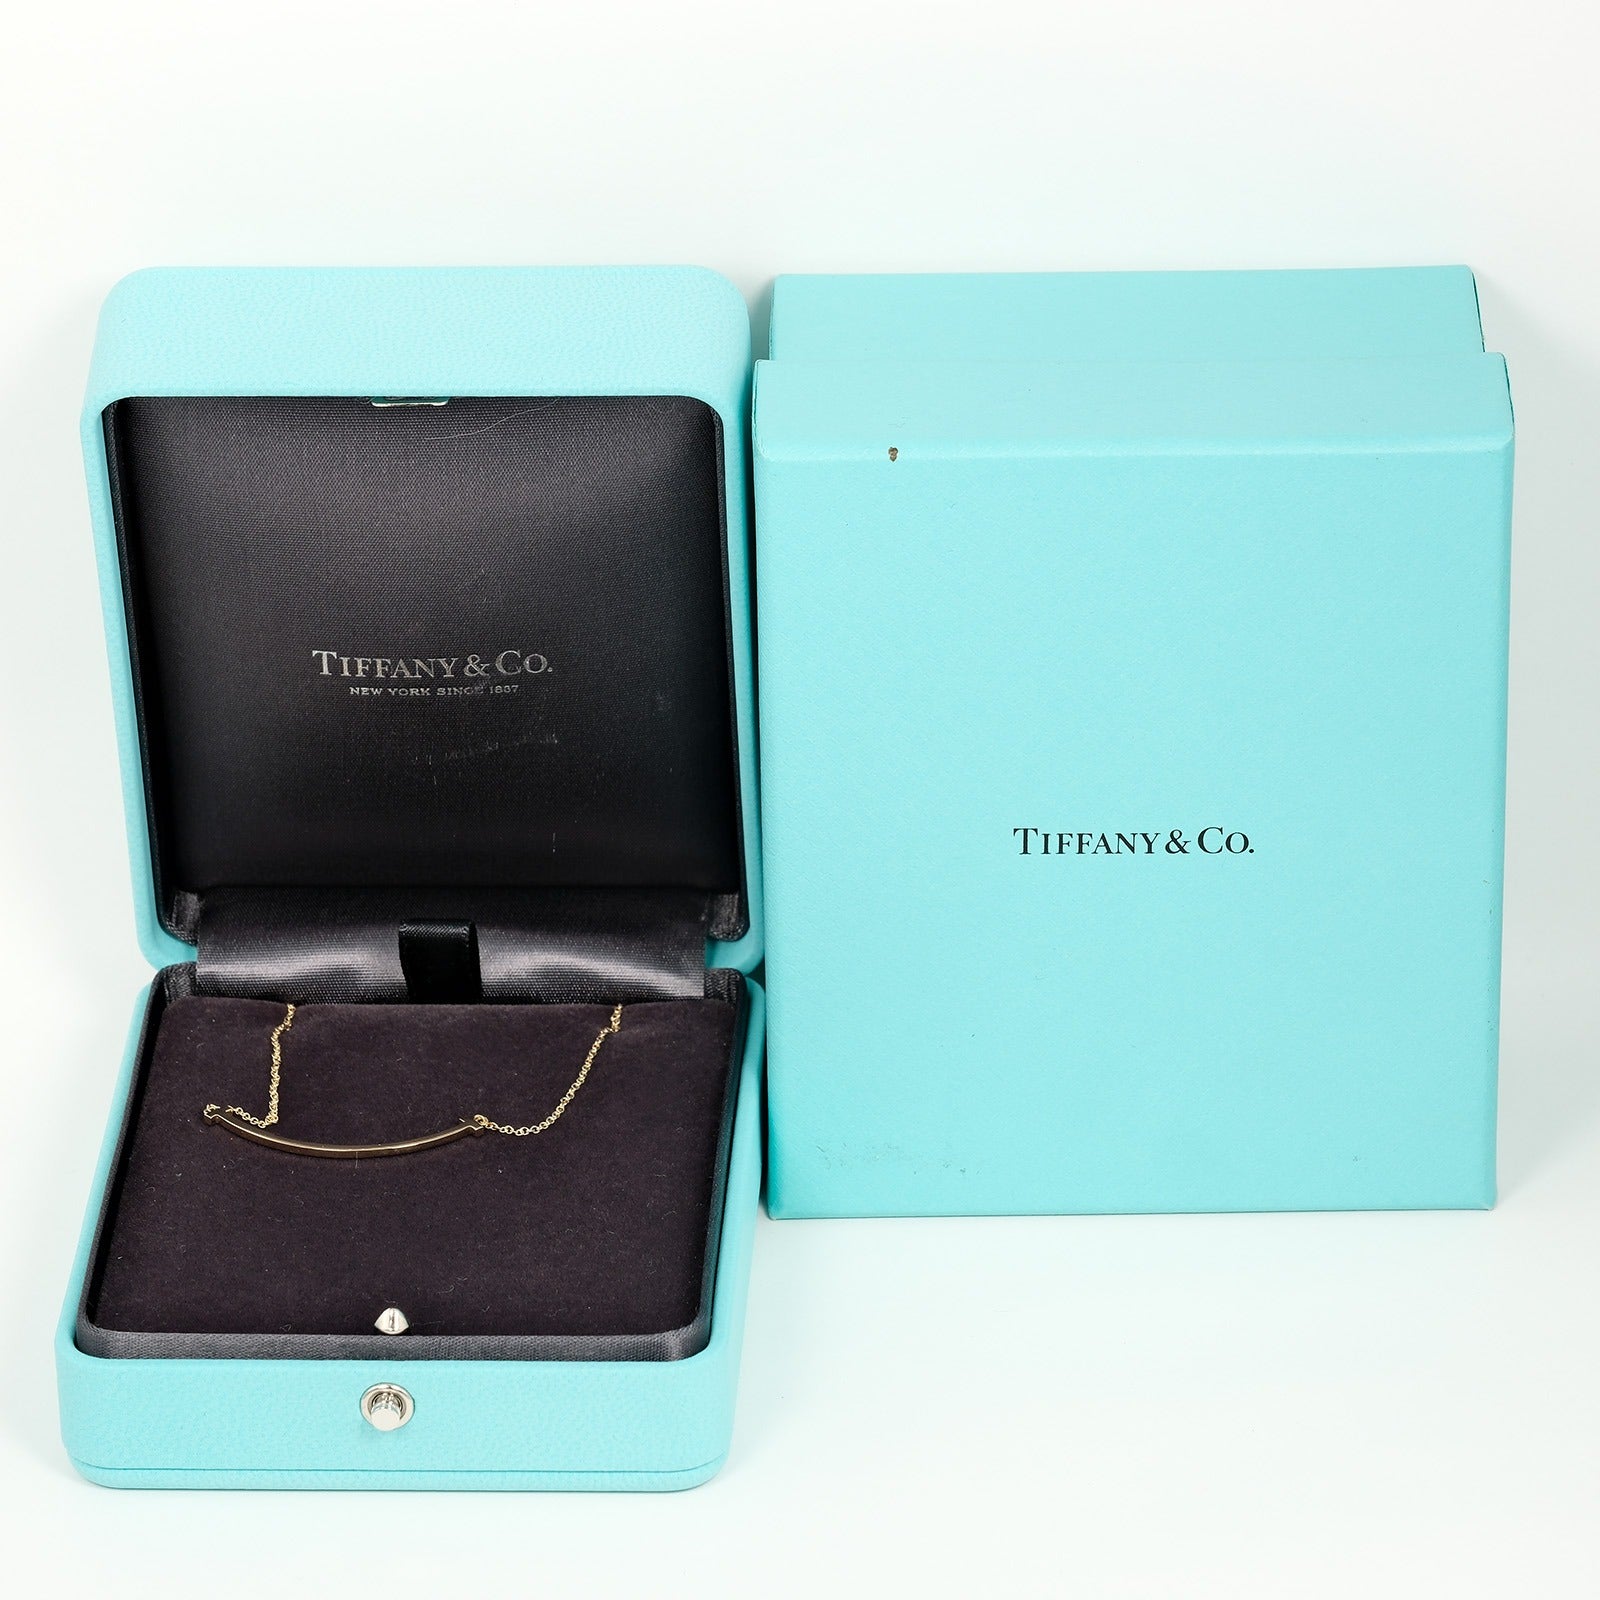 Tiffany Tiffany&Co. T Smile Small Necklace K18 YG Yellow G  2.94g A+ Ranked A+  Collar